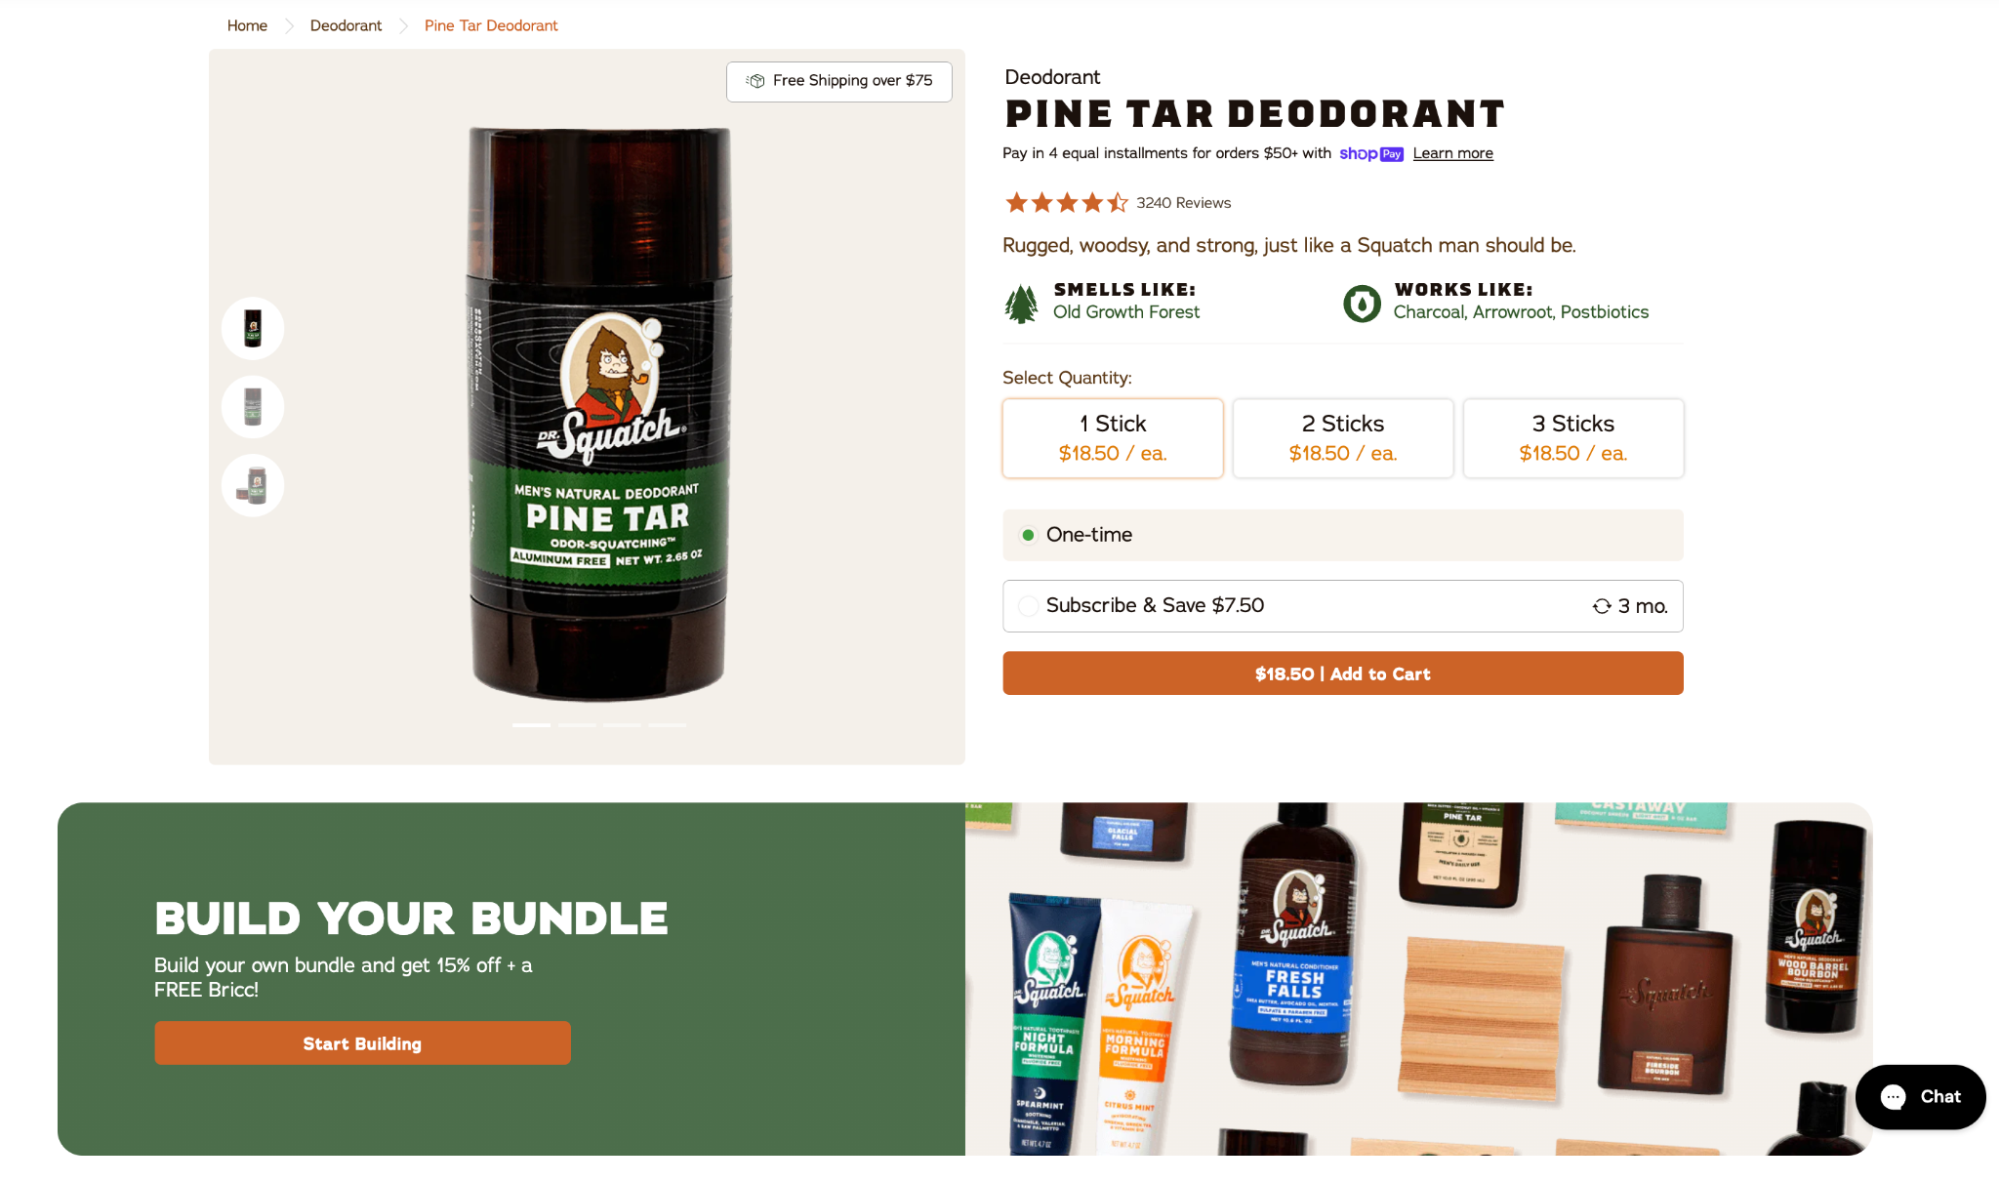 Dr. Squatch’s product pages are designed to persuade shoppers to purchase multiple products per visit.